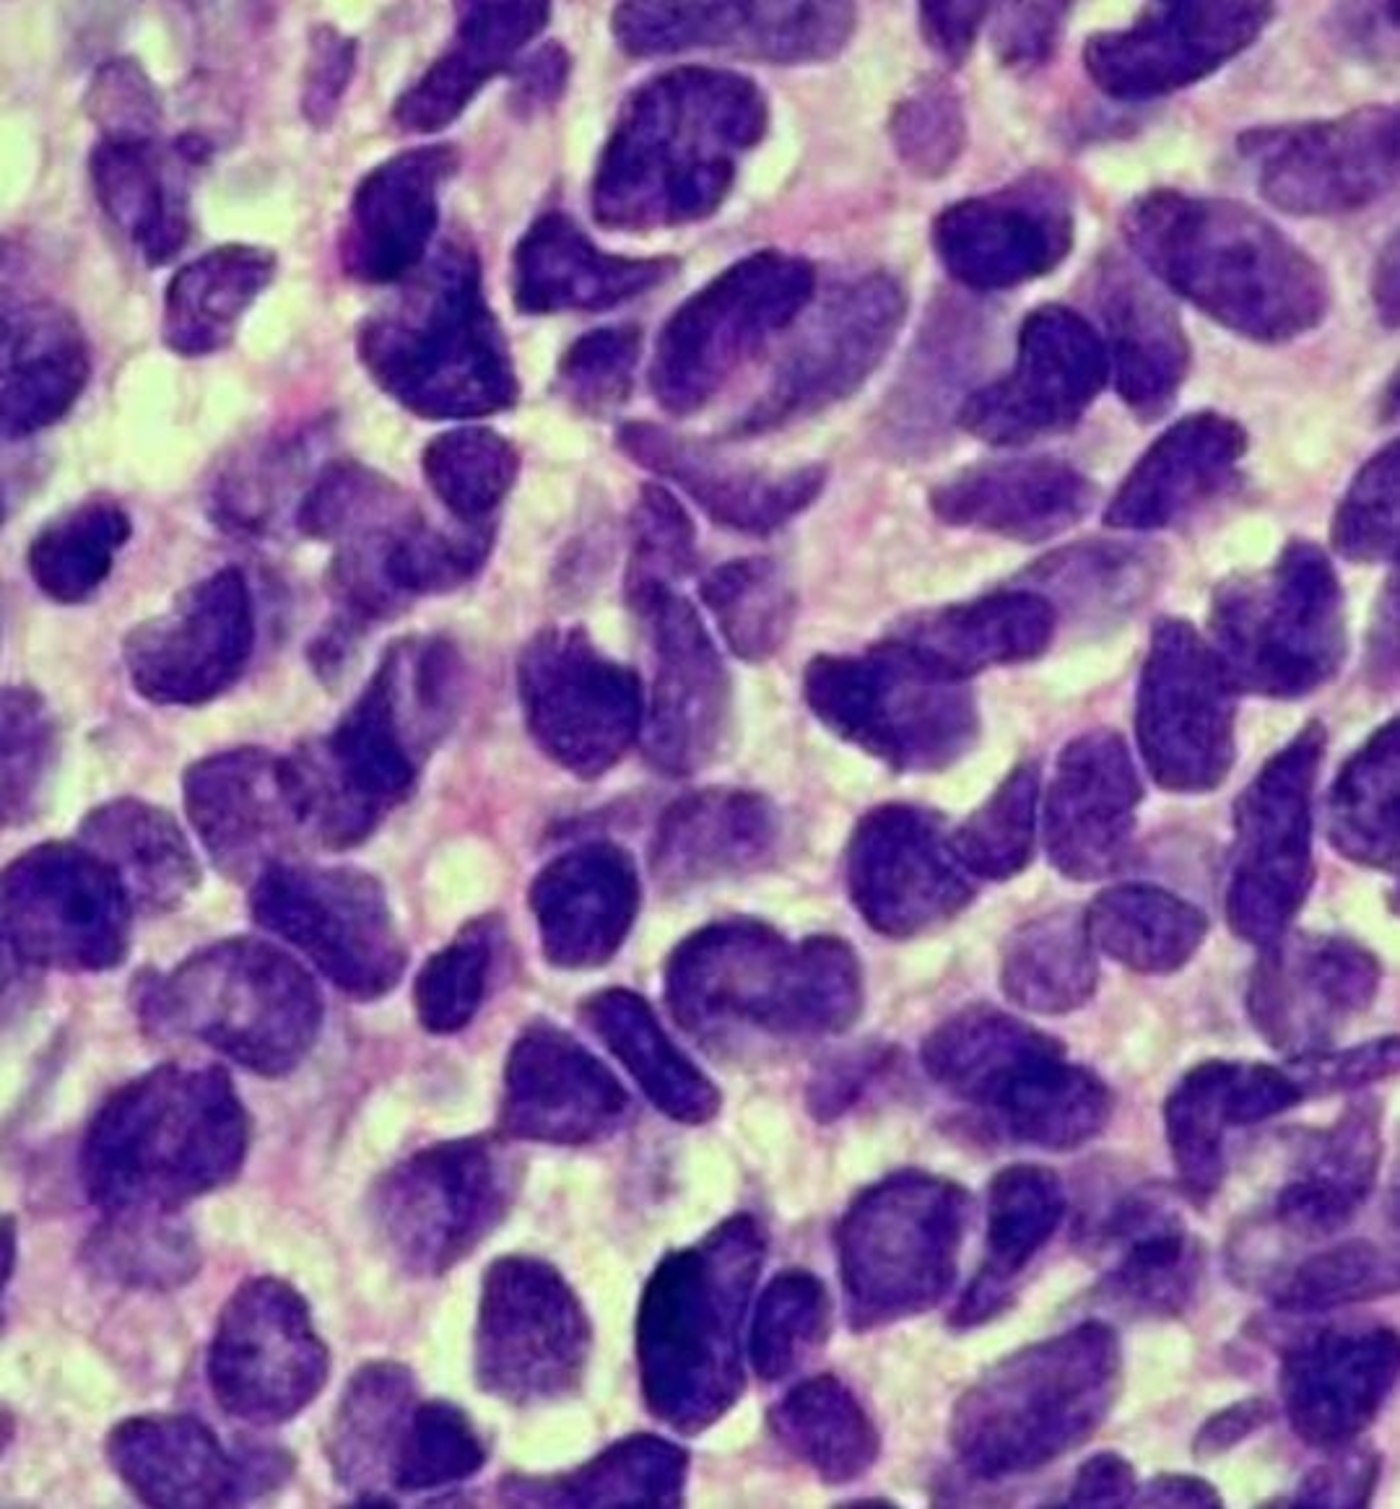 Cureus Spontaneous Tumor Lysis Syndrome in Small Cell